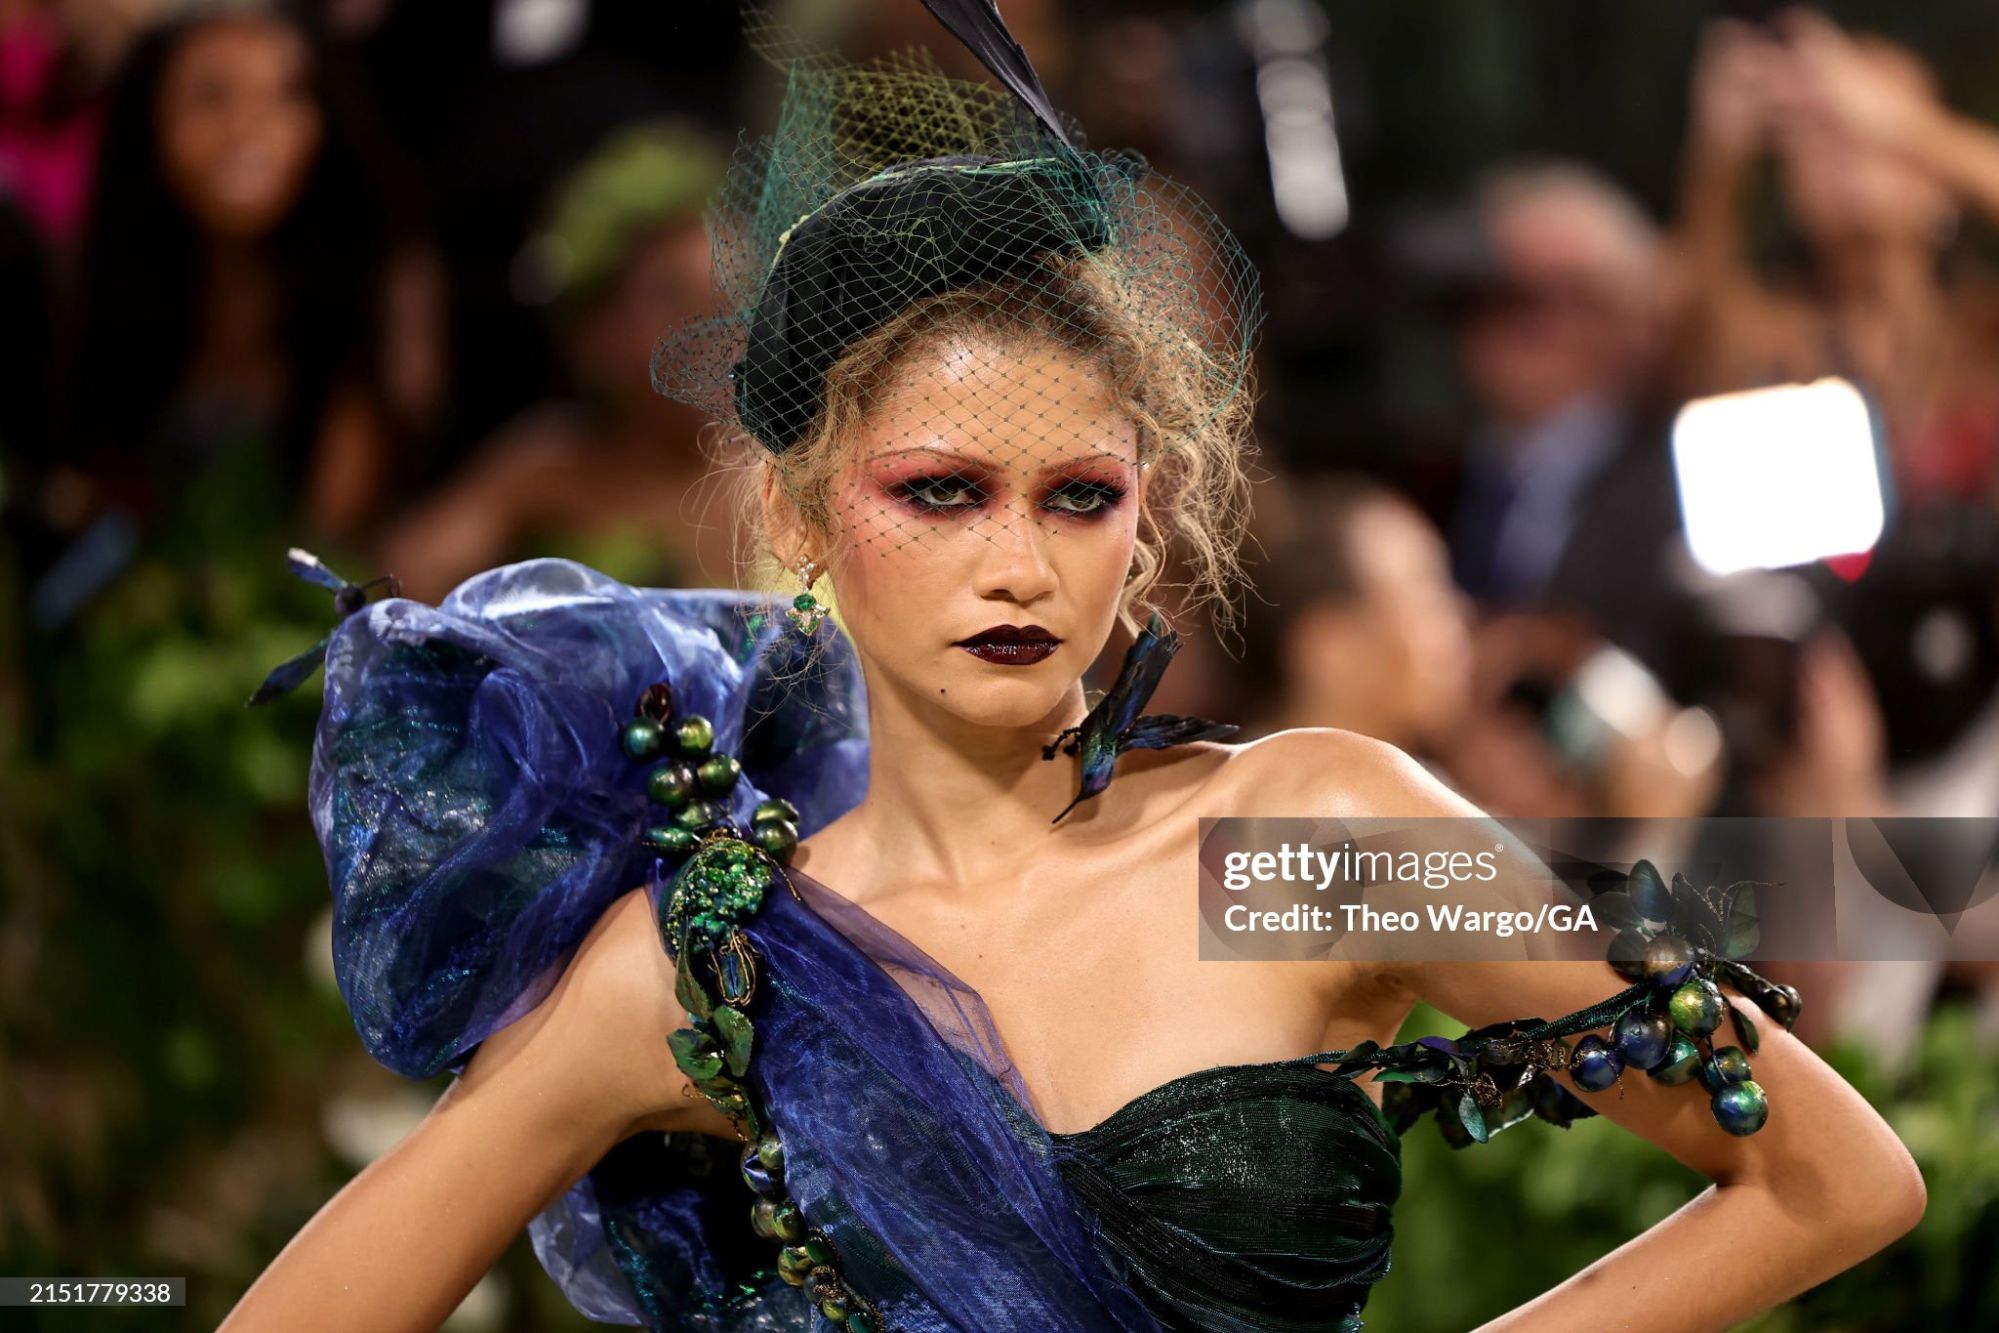 gettyimages-2151779338-2048x2048.jpg